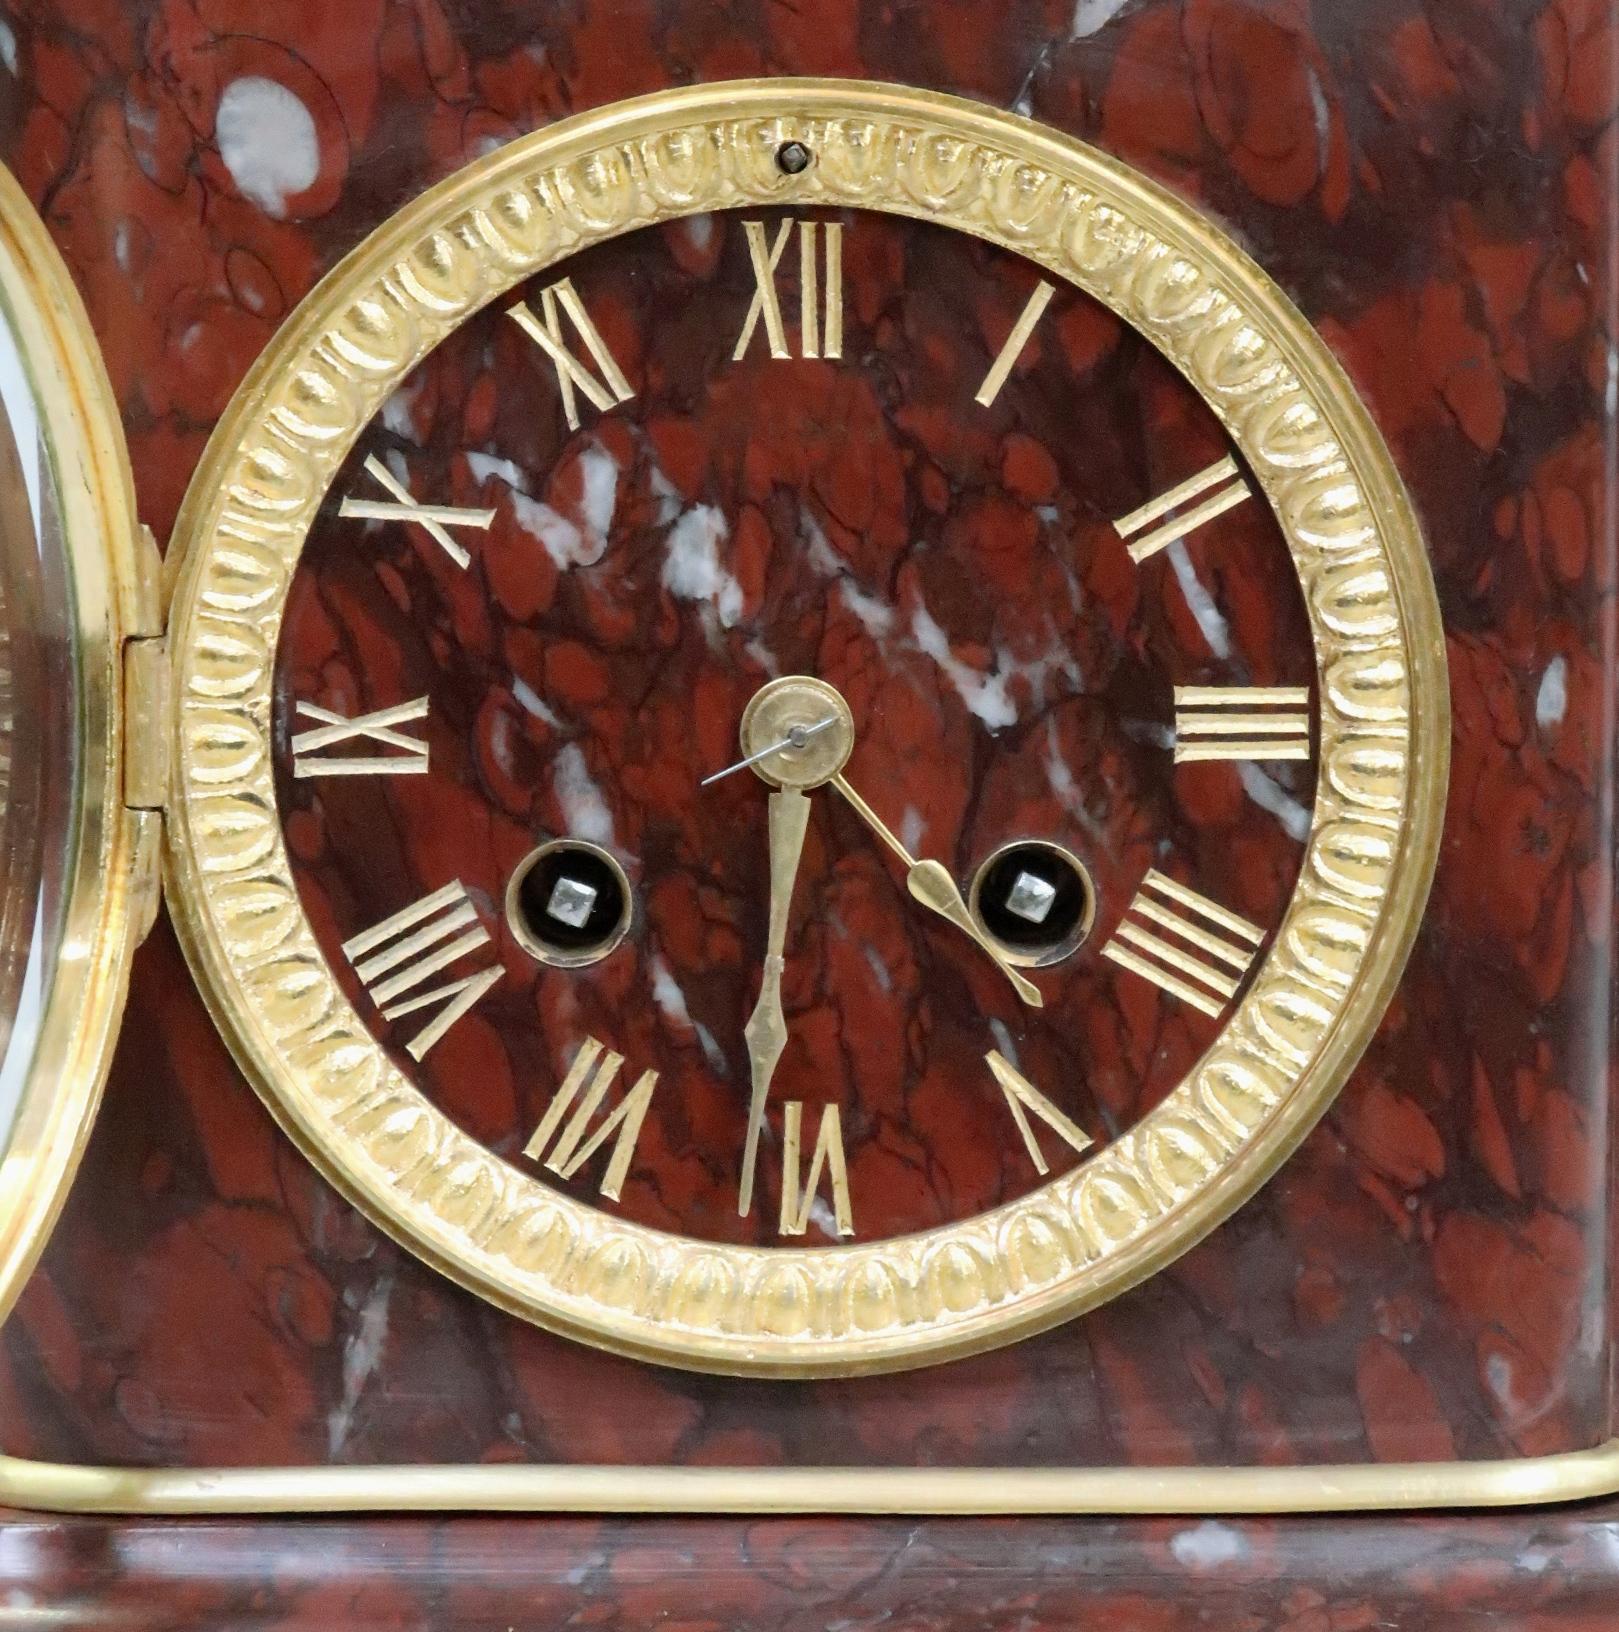 An extremely good quality French neoclassical style deep rouge griotte marble mantel clock with urn to the top and bronze gilt masked mounts stood on paw feet. The clock has a decorative brass bezel with etched gilt Roman numerals and a French eight